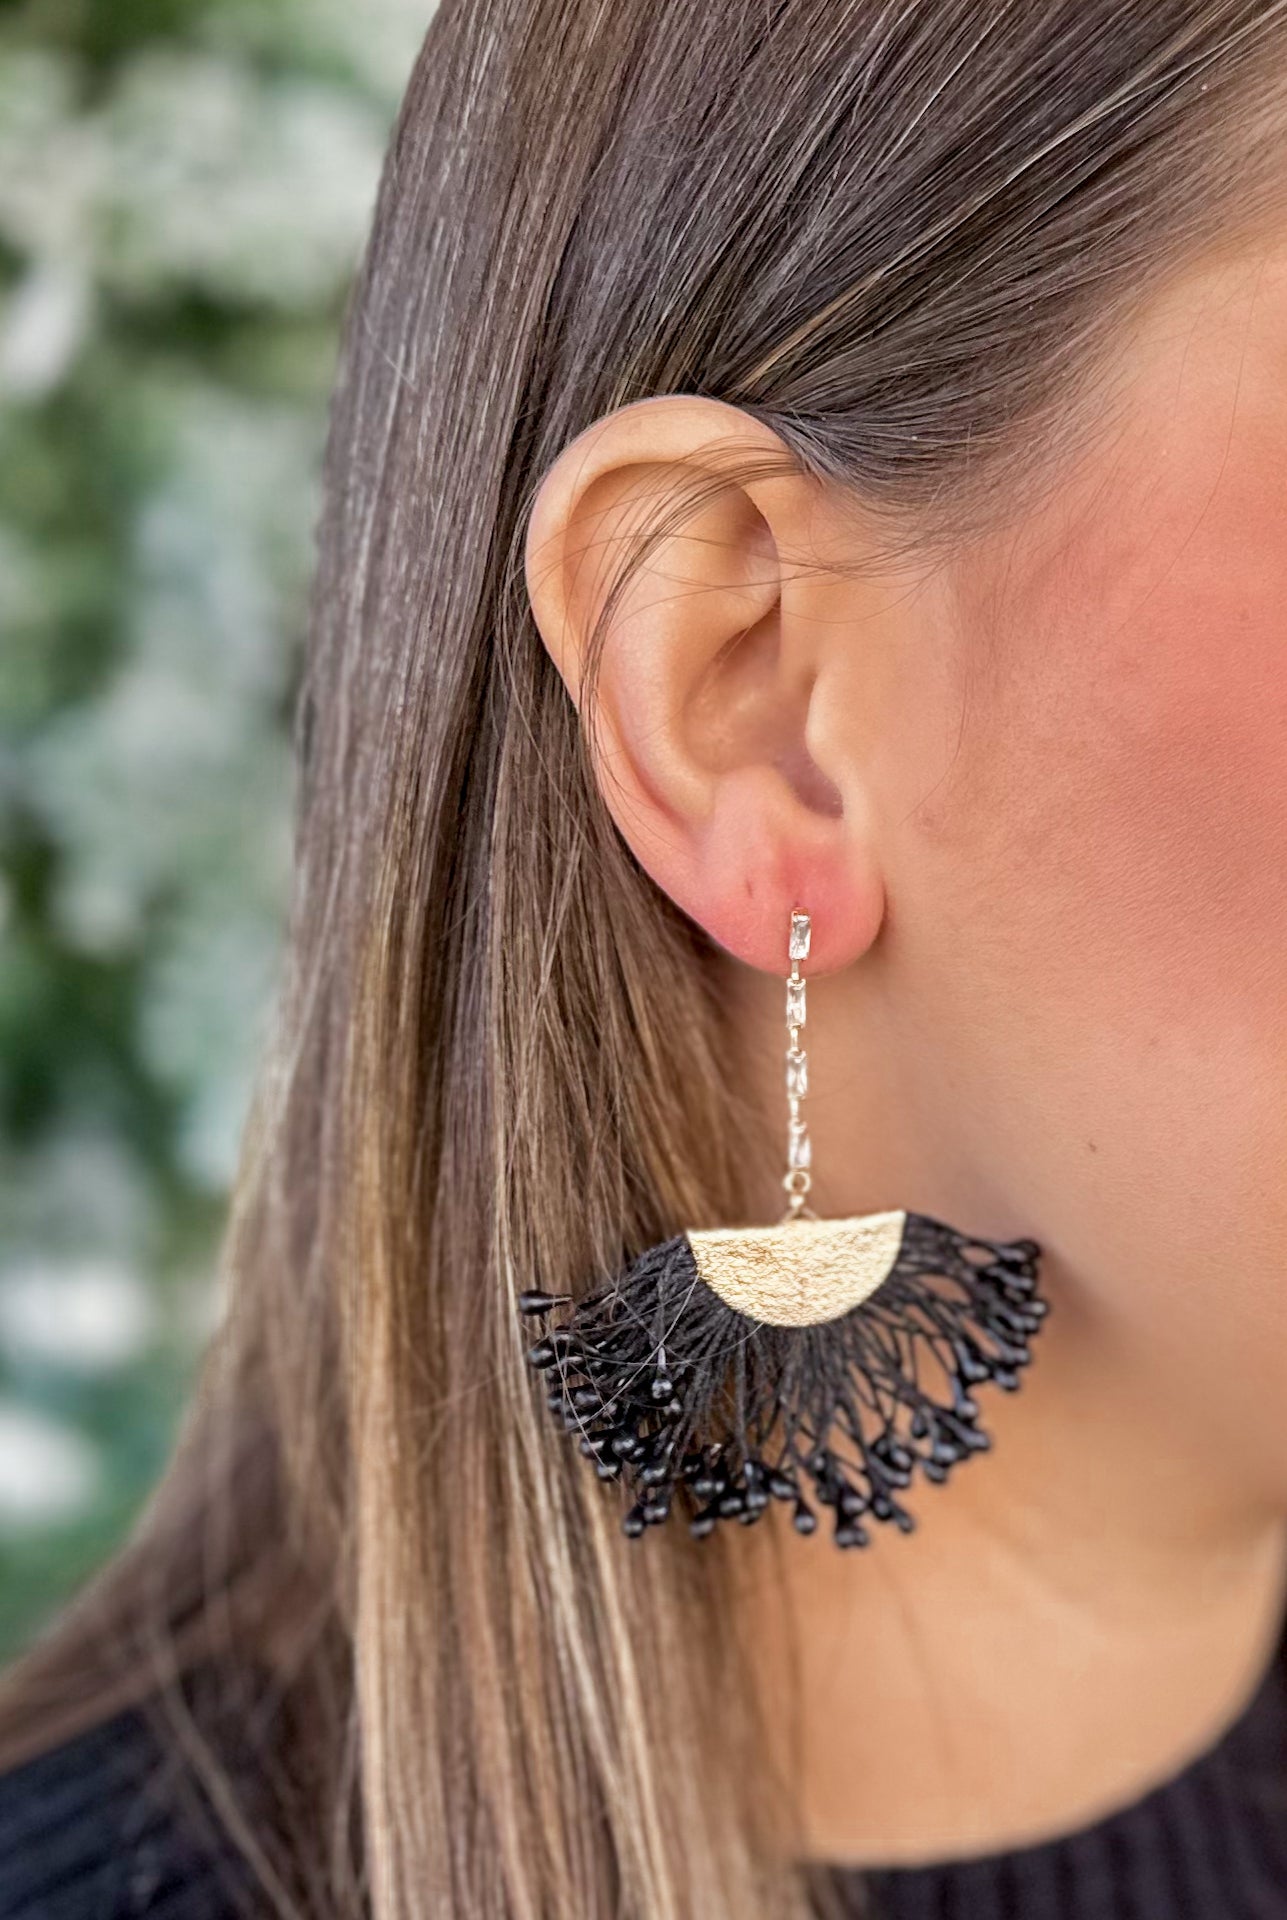 Millie B Audrey Earrings - Be You Boutique